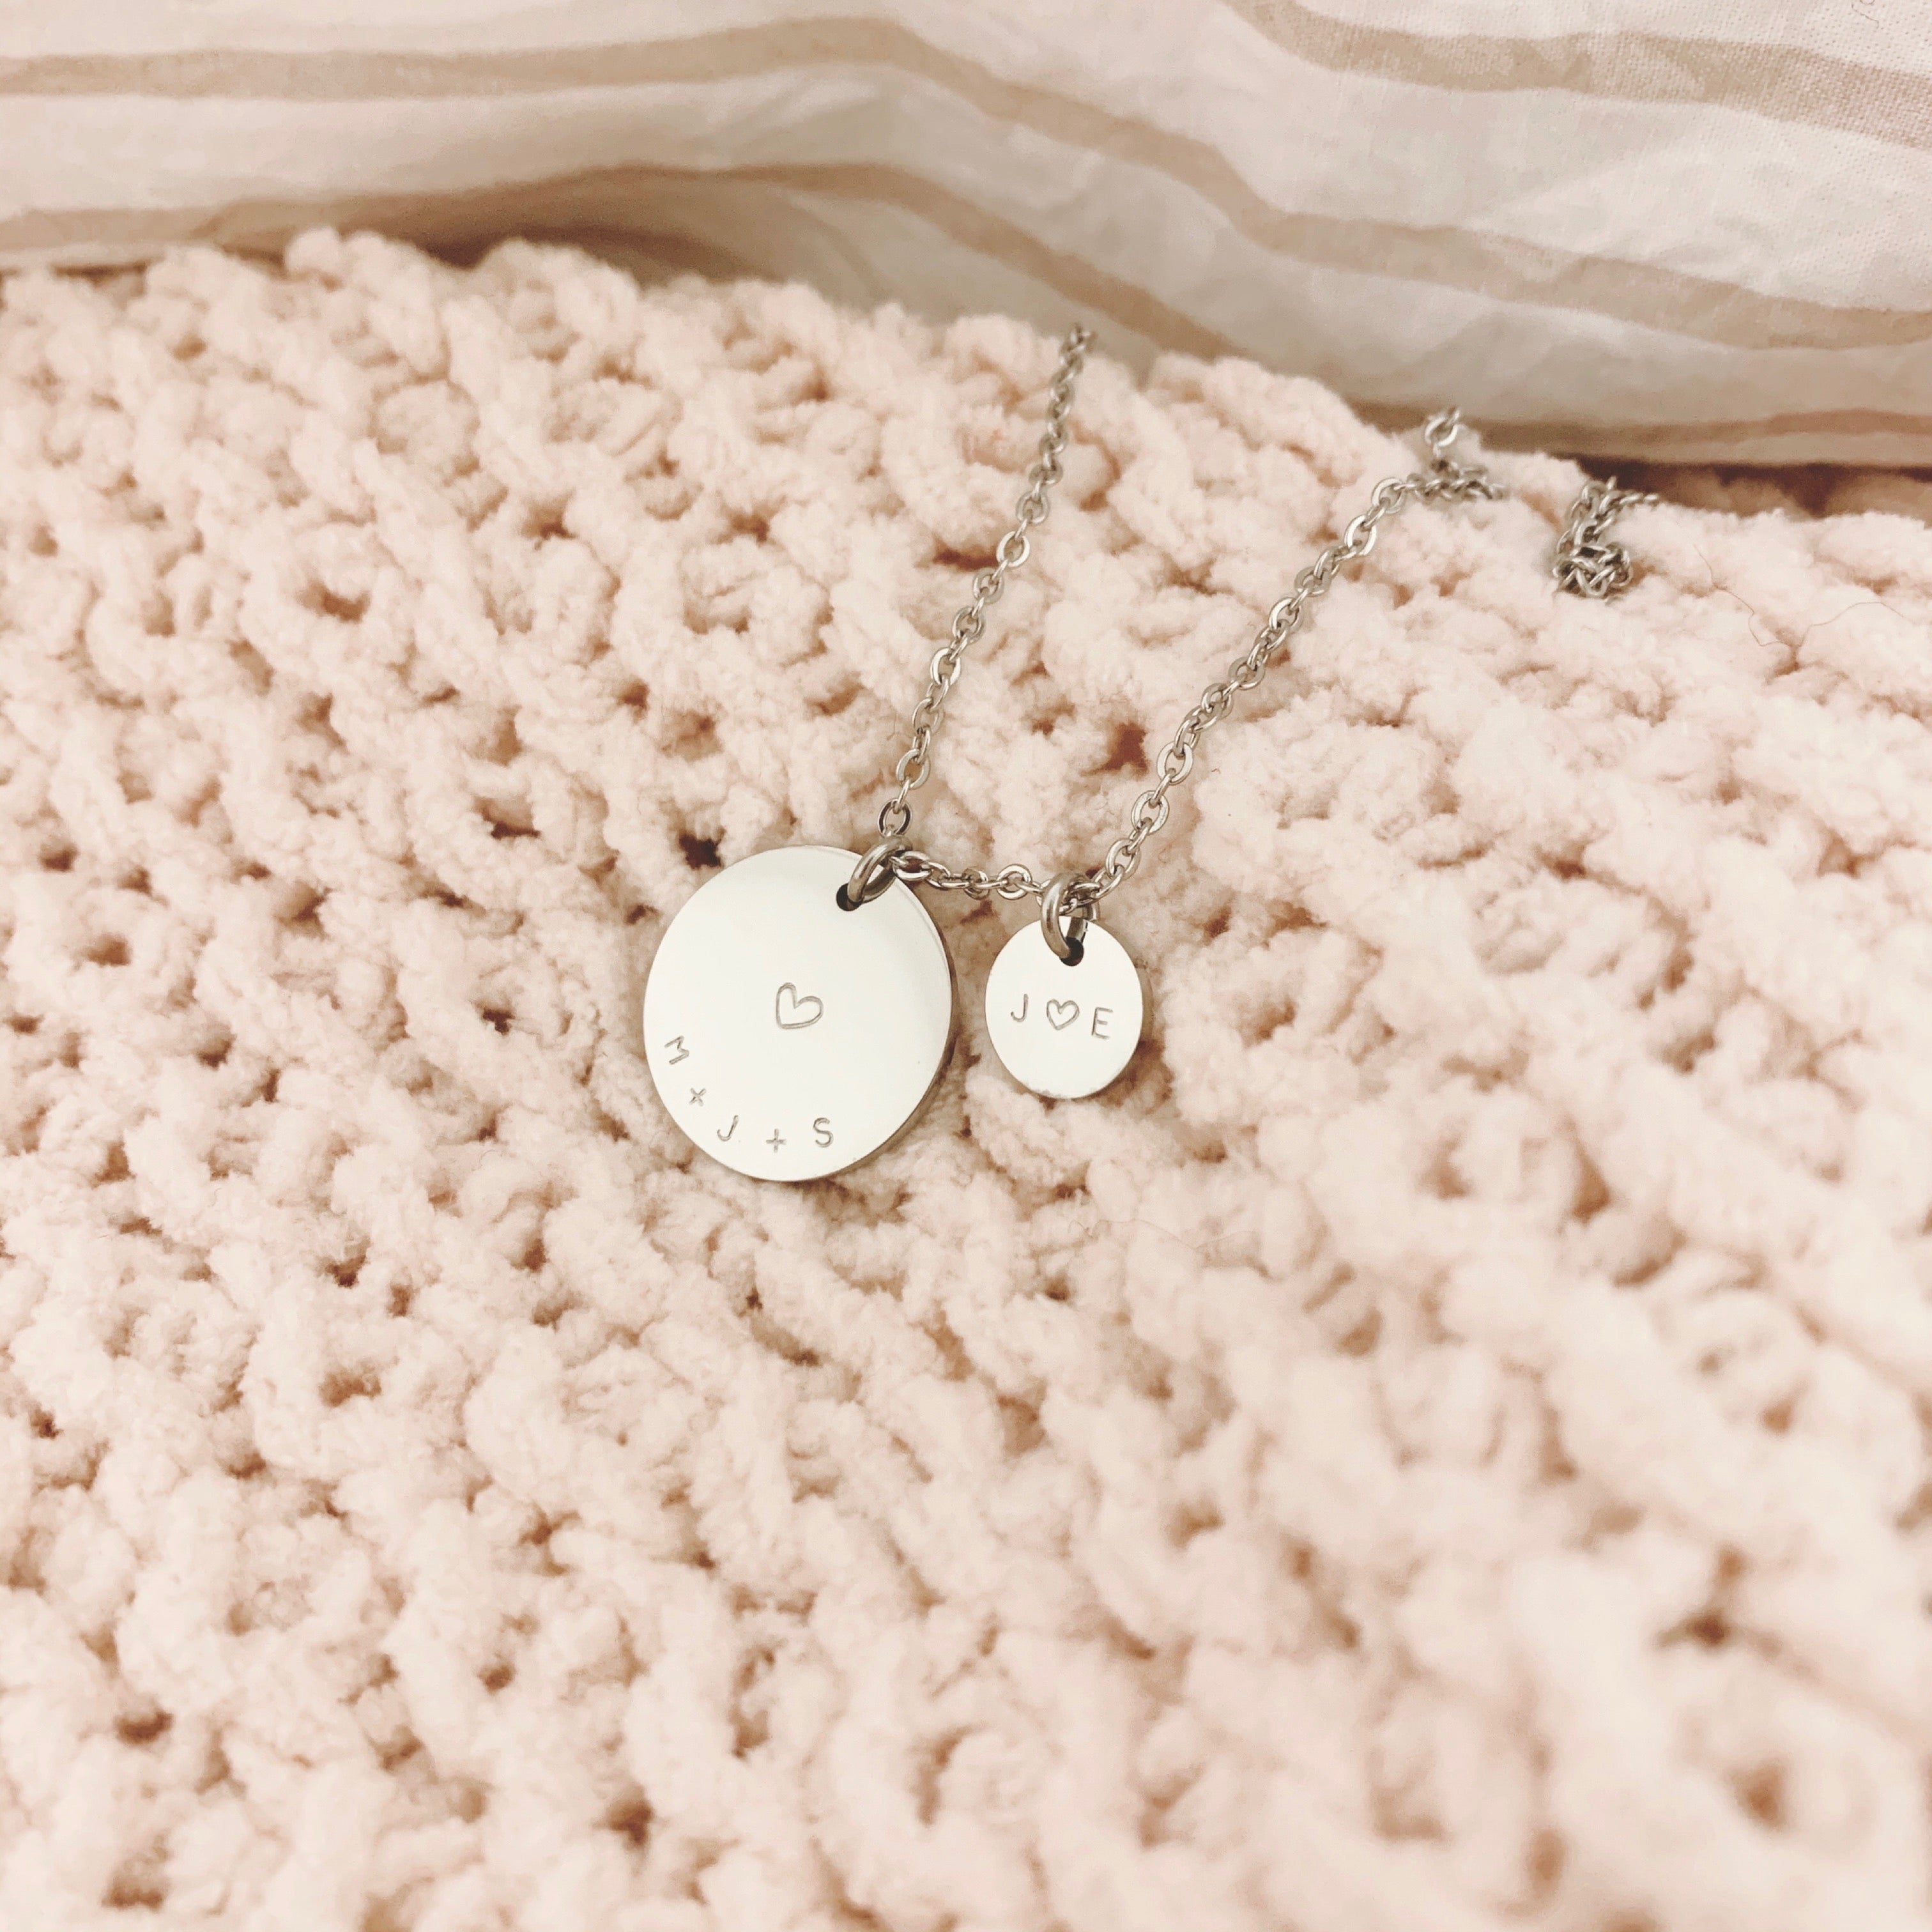 Large Disc + Small Disc Necklace